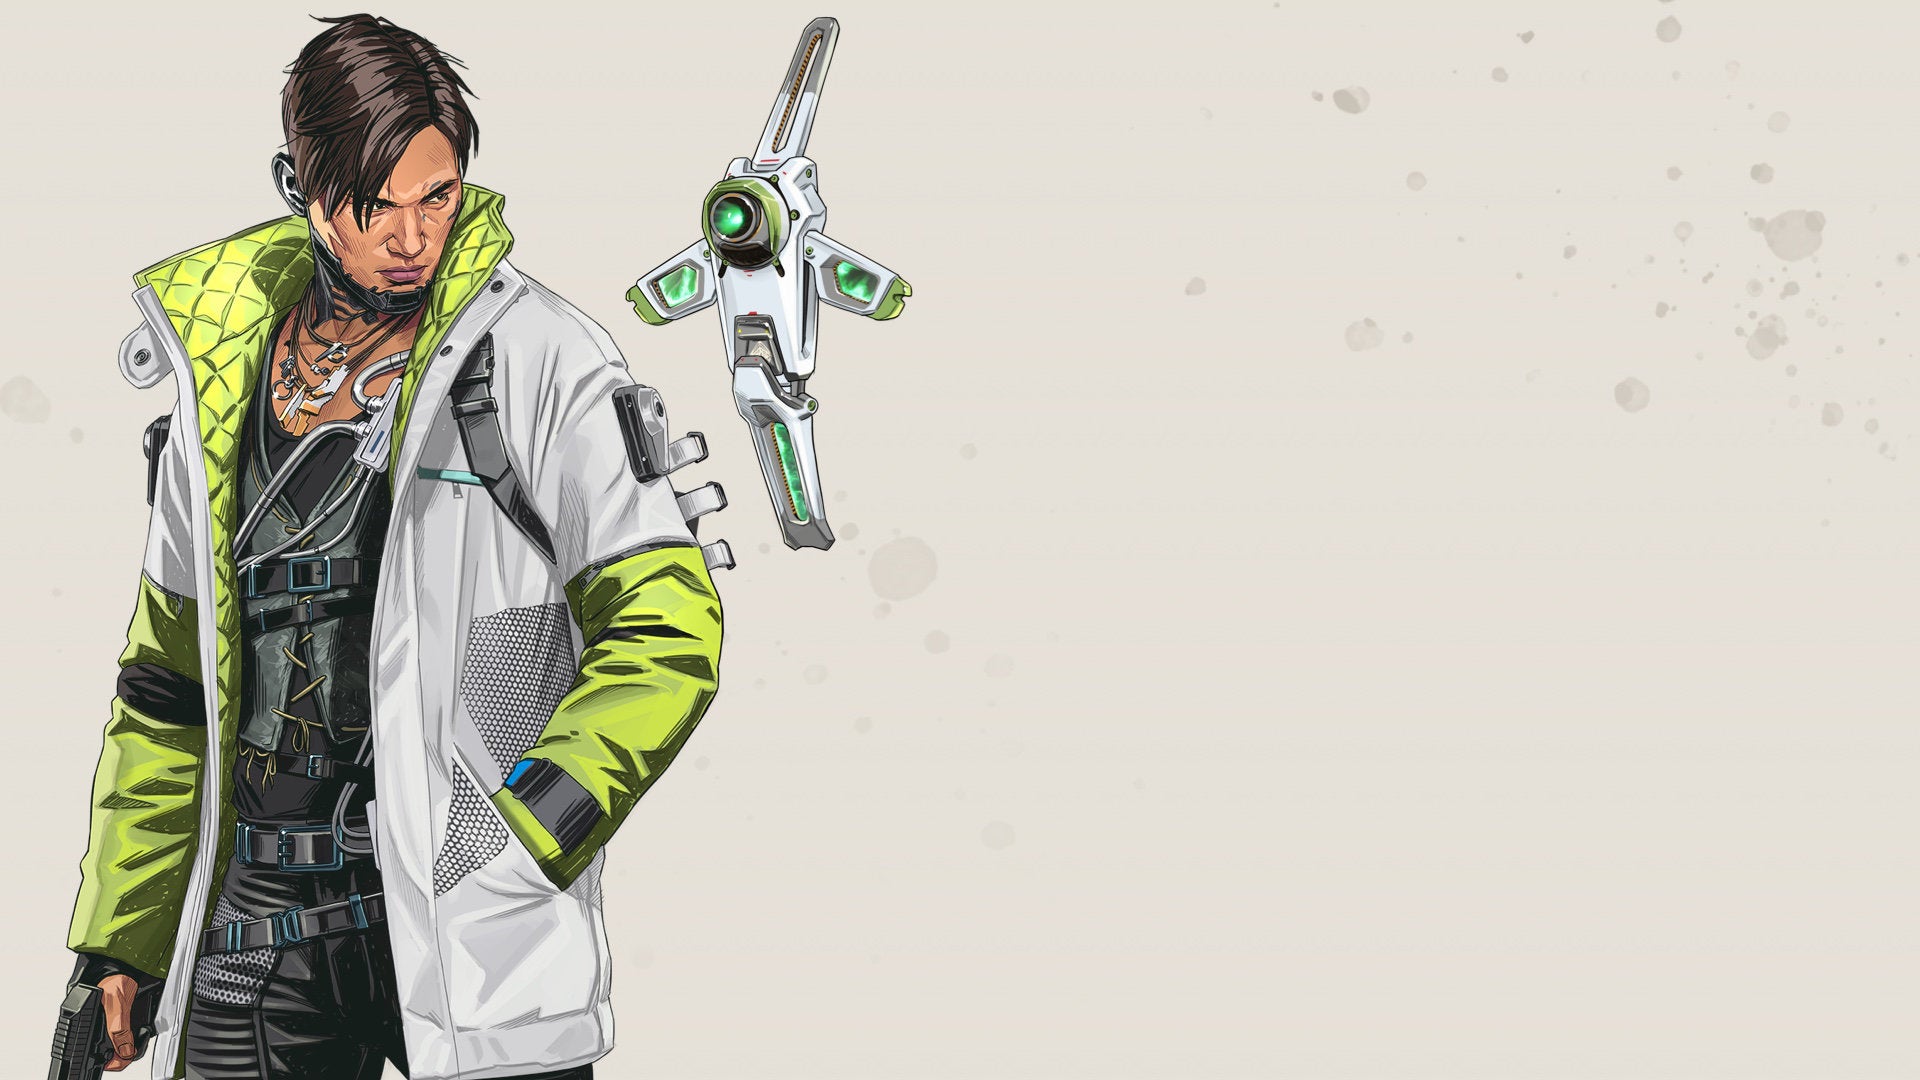 Official art of Crypto, one of the Apex Legends characters.